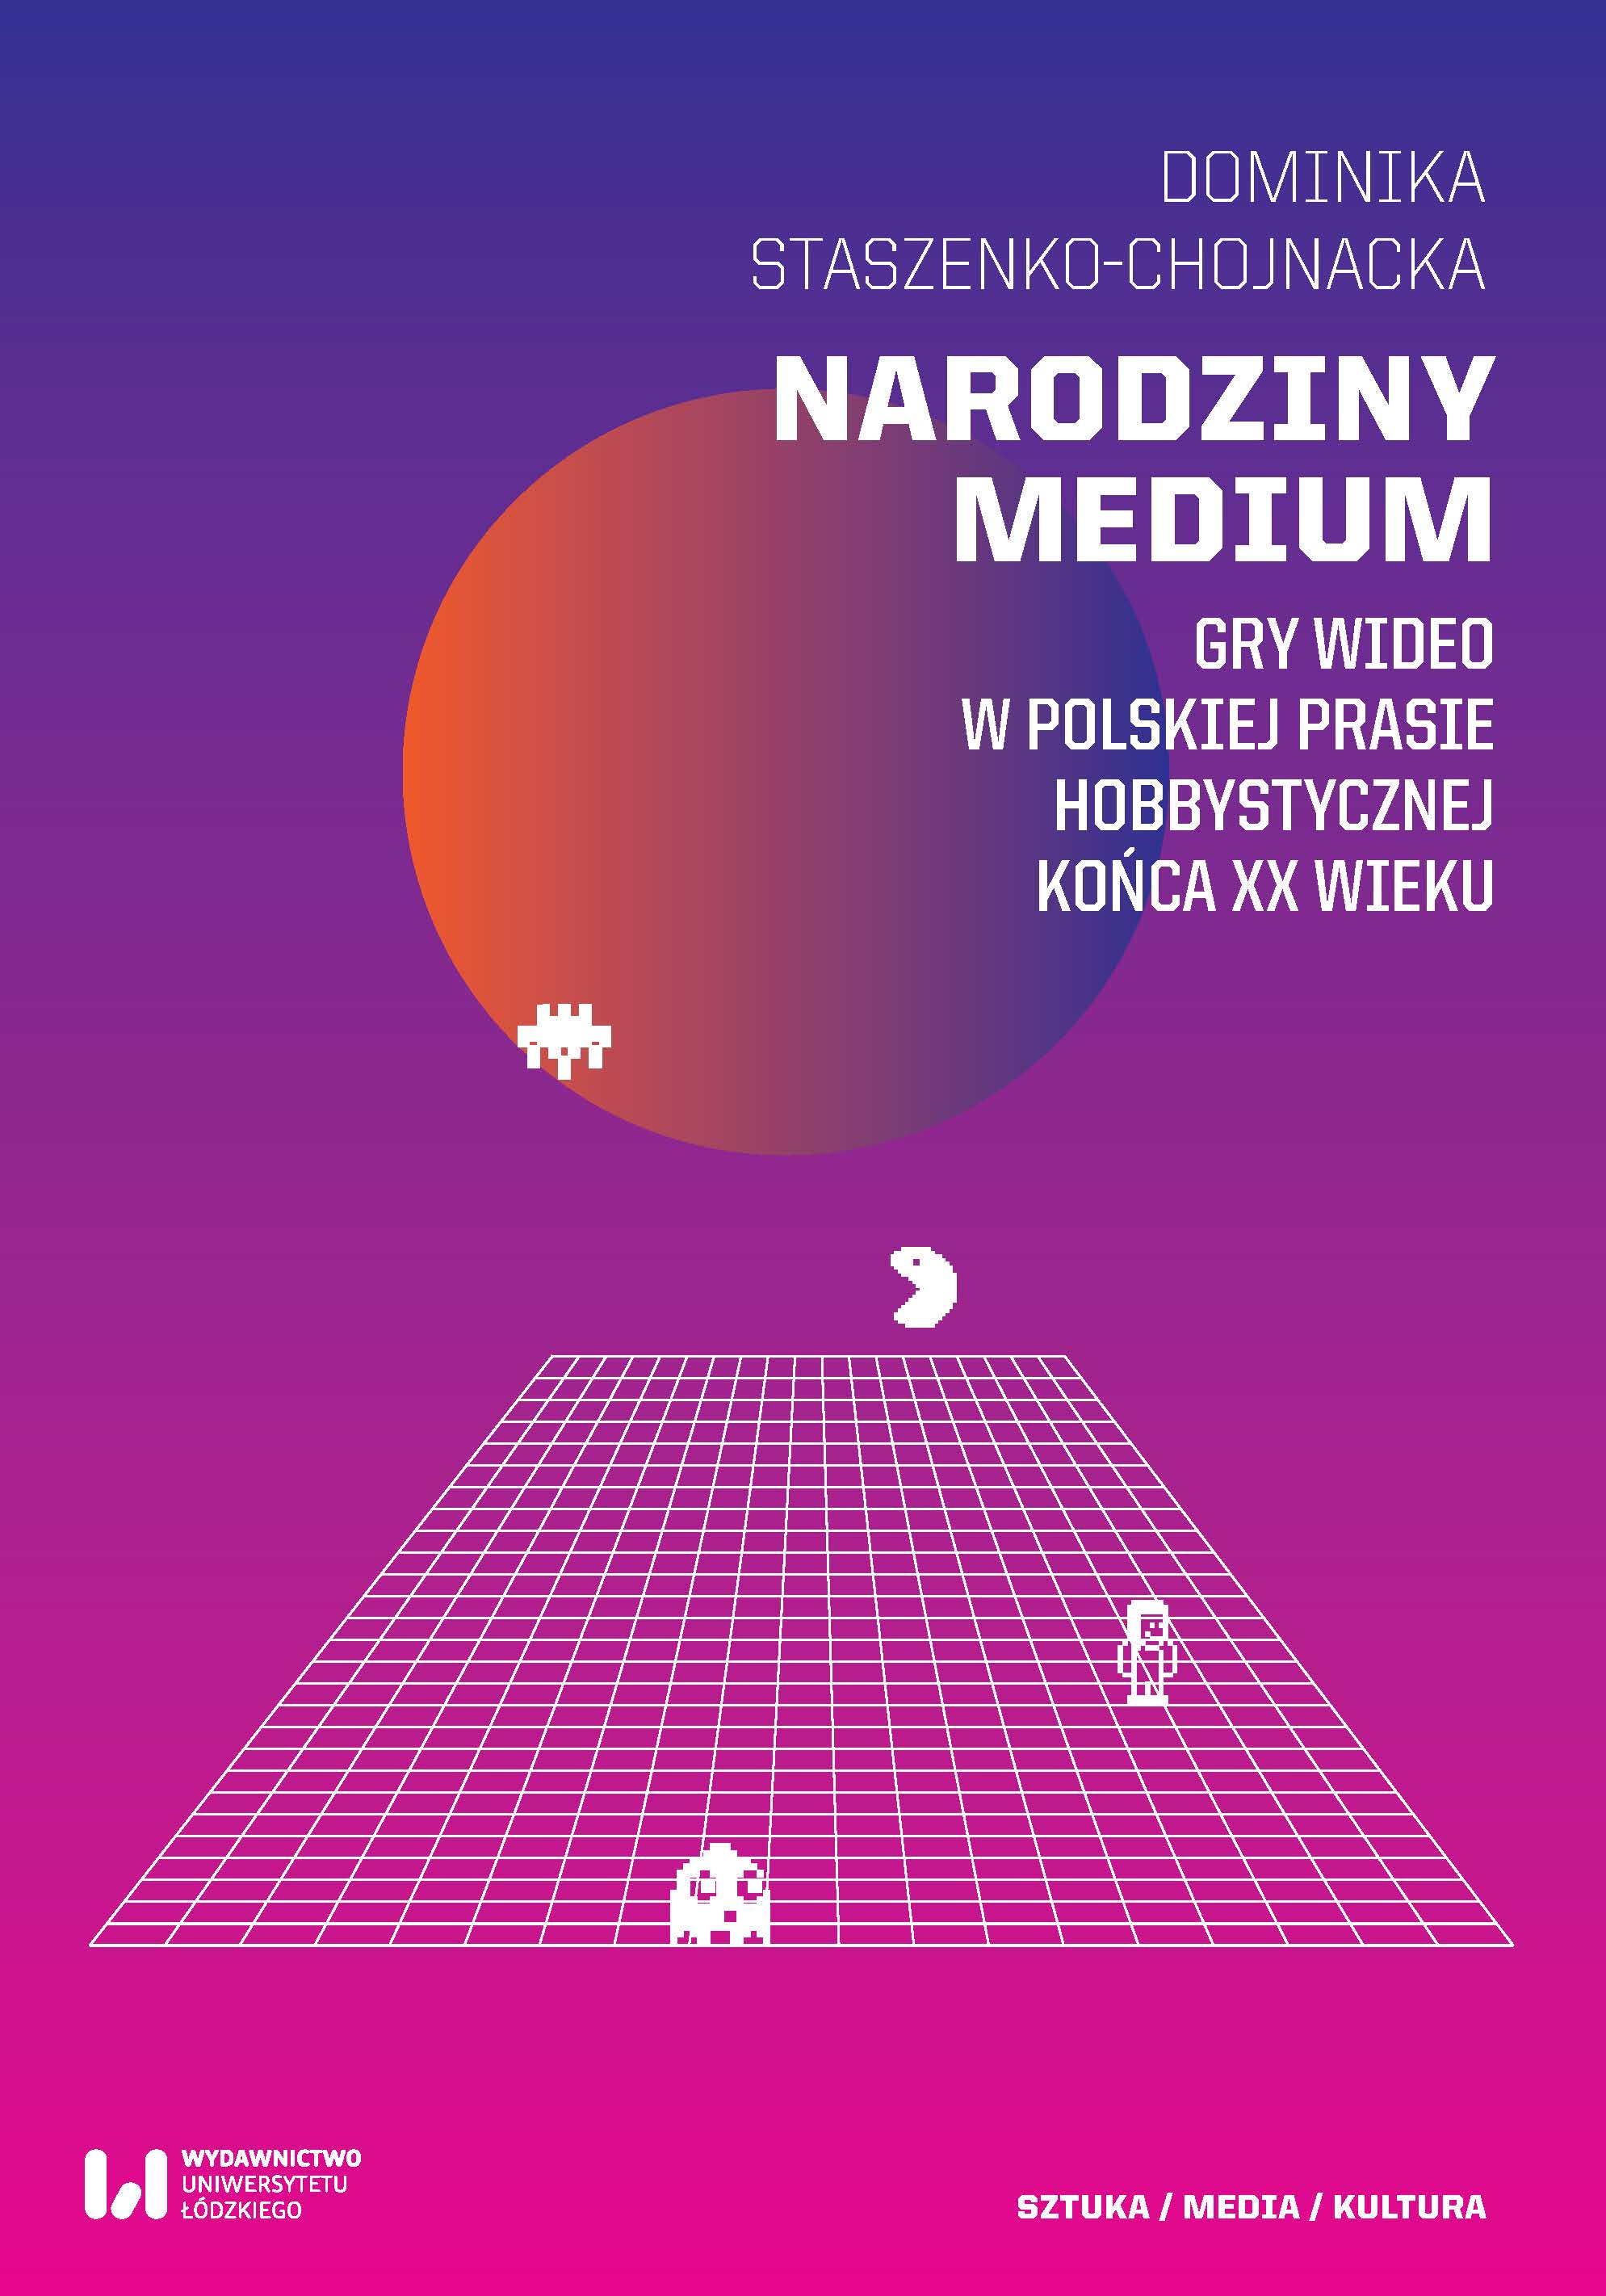 The Inception of a New Media. Video Games in the Polish Hobby Press at the End of 20th Century